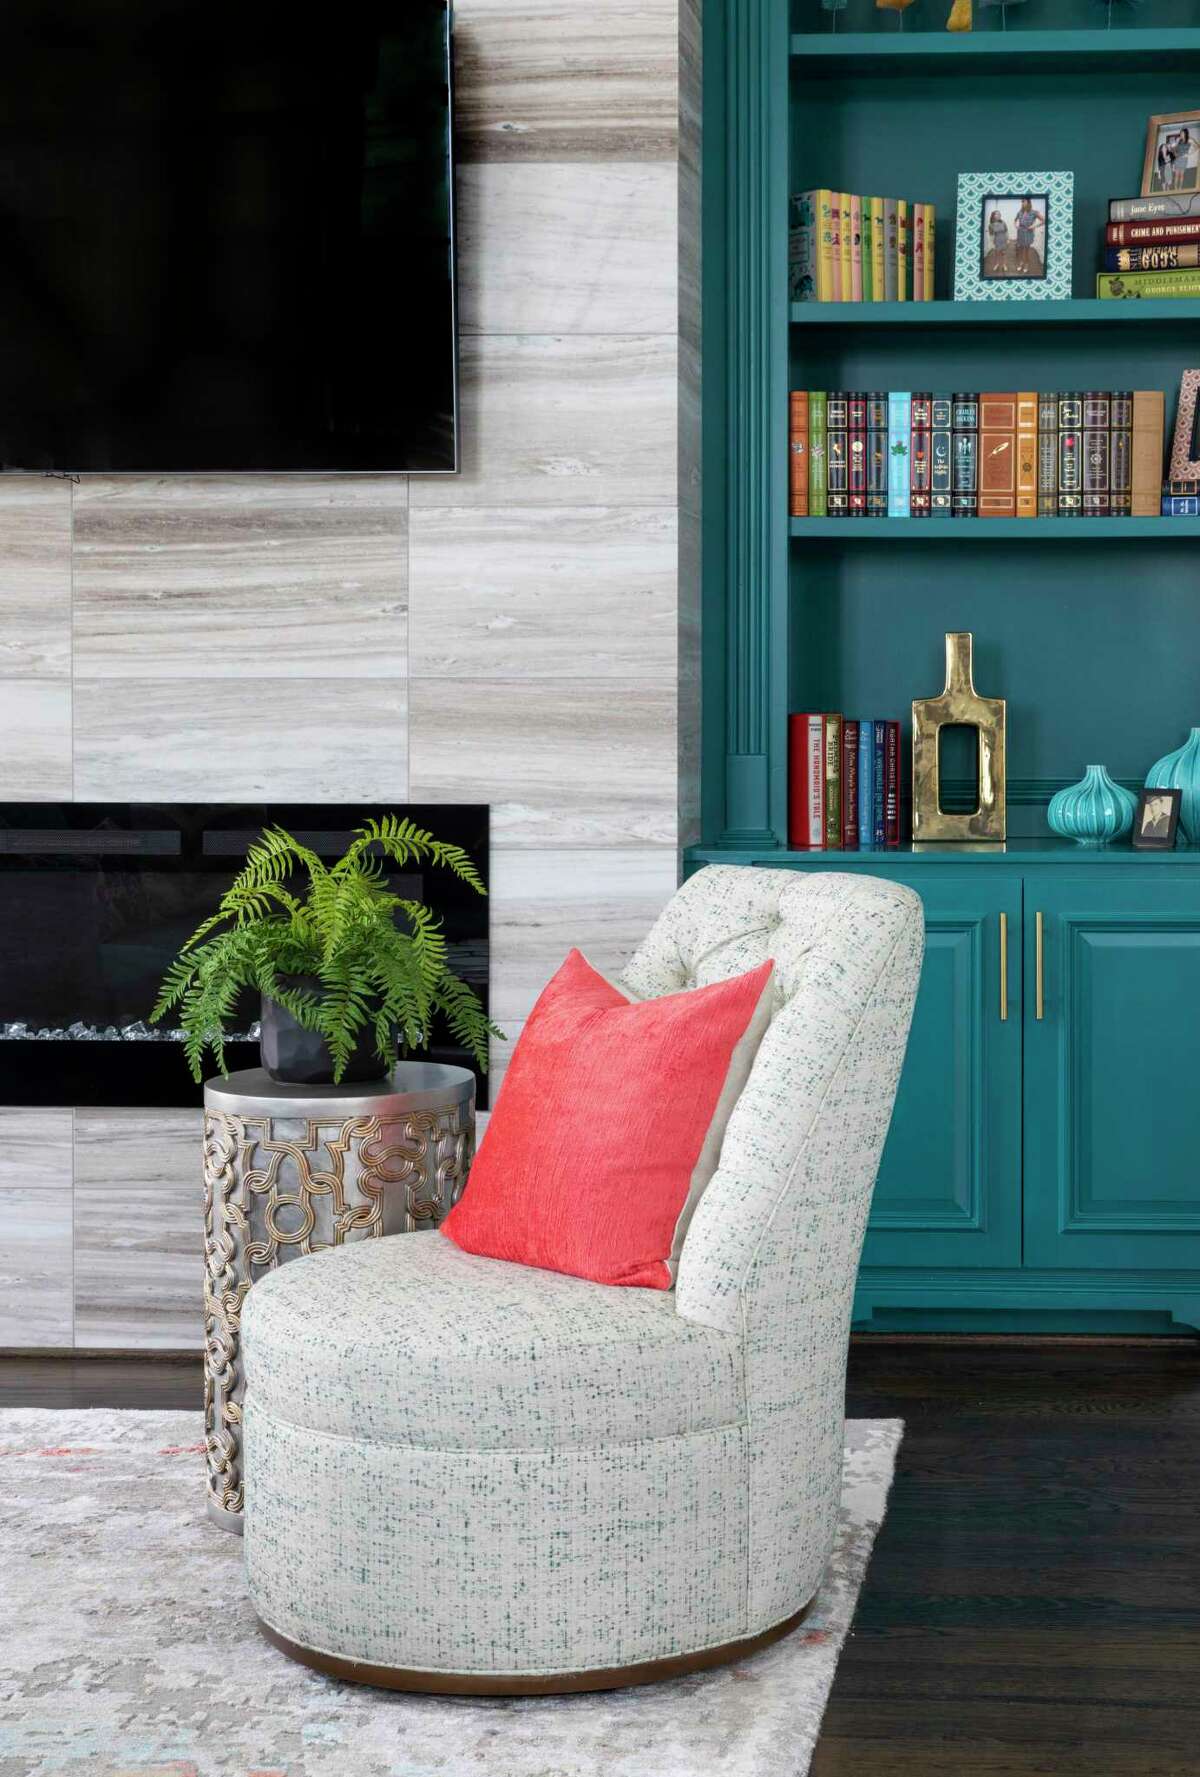 Curved or rounded furniture and bold colors will be a popular trend in homes in 2022, says Houston interior designer Pamela O'Brien of Pamela Hope Designs. In this home, a rounded swivel chair sits in front of a bookcase painted bright teal.